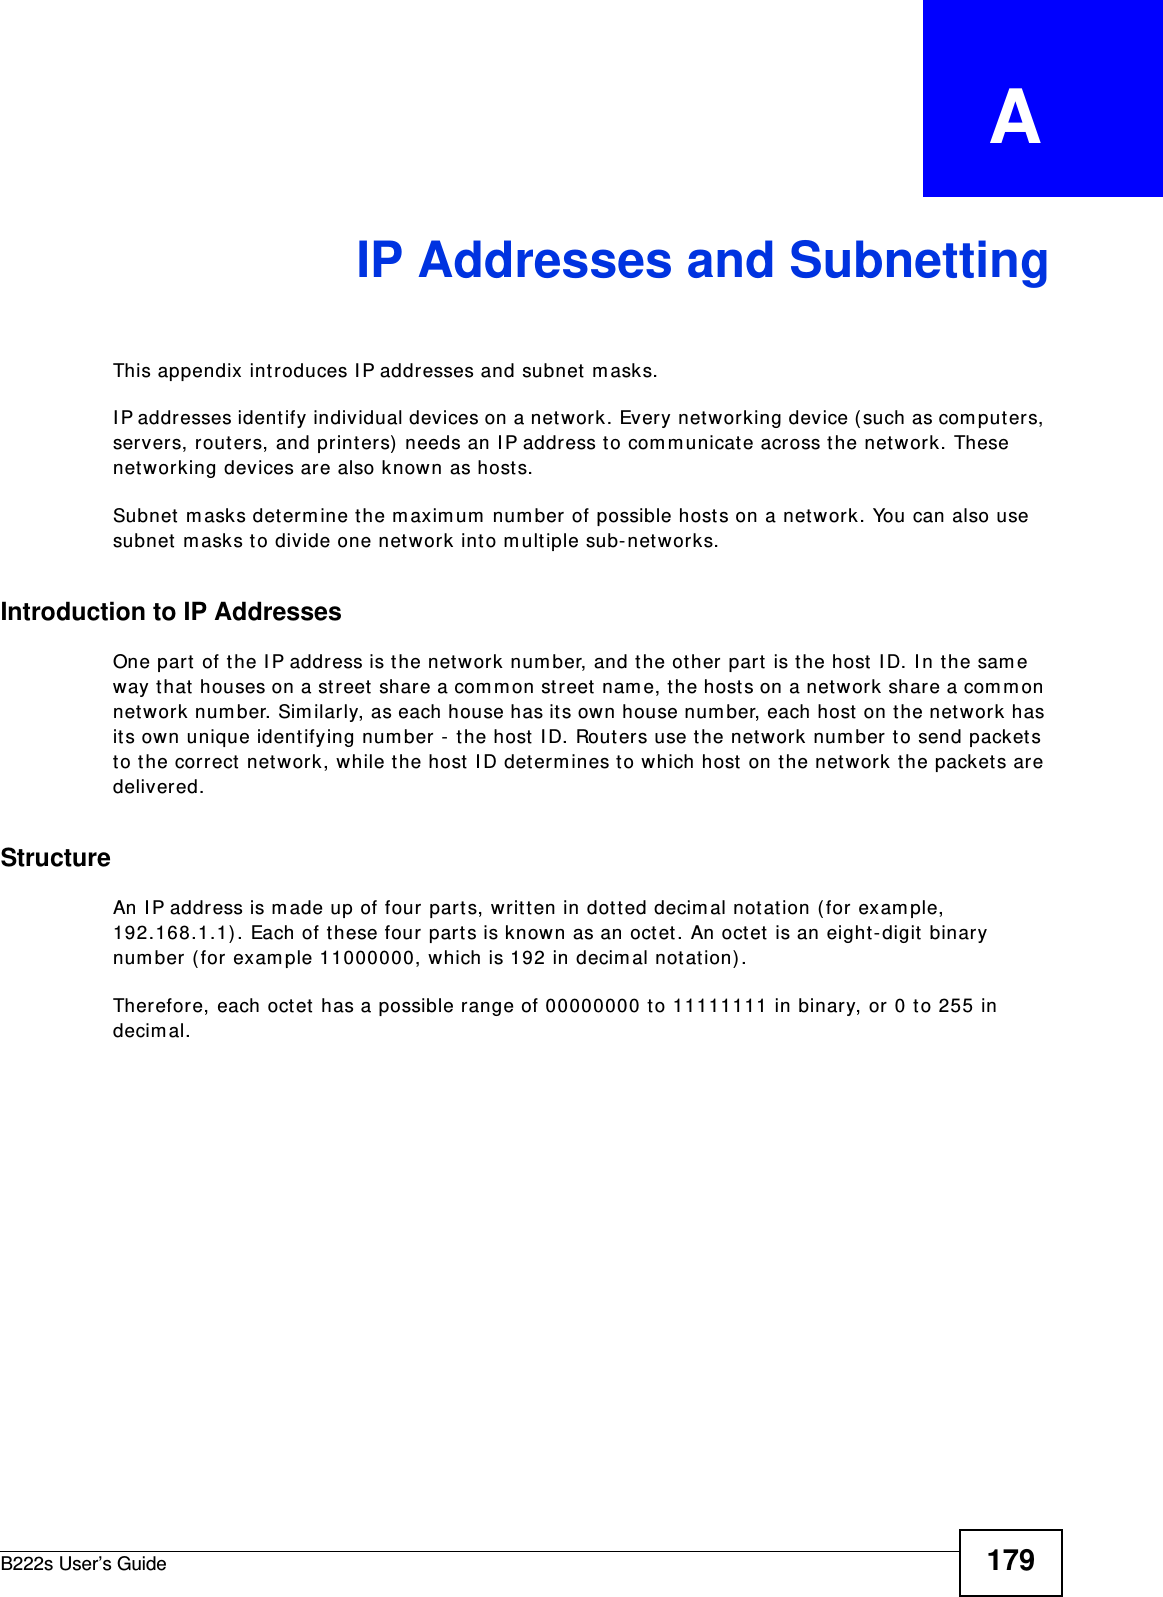 B222s User’s Guide 179APPENDIX   AIP Addresses and SubnettingThis appendix introduces I P addresses and subnet  m asks. I P addr esses ident ify individual devices on a net work. Every net working device (such as com put ers, servers, rout ers, and printers)  needs an I P addr ess t o com m unicat e across t he net work. These networking devices are also known as hosts.Subnet m asks det erm ine the m axim um  num ber of possible hosts on a net work. You can also use subnet  m asks t o divide one network into m ult iple sub- net works.Introduction to IP AddressesOne part  of t he I P address is t he net work num ber, and t he ot her part  is the host  I D. I n t he sam e way t hat  houses on a street  share a com mon street  nam e, t he hosts on a net work share a com m on network num ber. Sim ilarly, as each house has it s own house num ber, each host  on t he network has it s own unique ident ifying num ber -  t he host I D. Rout ers use t he net work num ber t o send packet s to t he correct network, while the host  I D determ ines t o which host  on t he network t he packet s are delivered.StructureAn I P address is m ade up of four part s, writ ten in dot t ed decim al notat ion (for exam ple, 192.168.1.1) . Each of t hese four part s is known as an octet. An octet  is an eight - digit  binary num ber ( for exam ple 11000000, which is 192 in decim al not at ion). Therefore, each octet  has a possible range of 00000000 to 11111111 in binary, or 0 t o 255 in decim al.